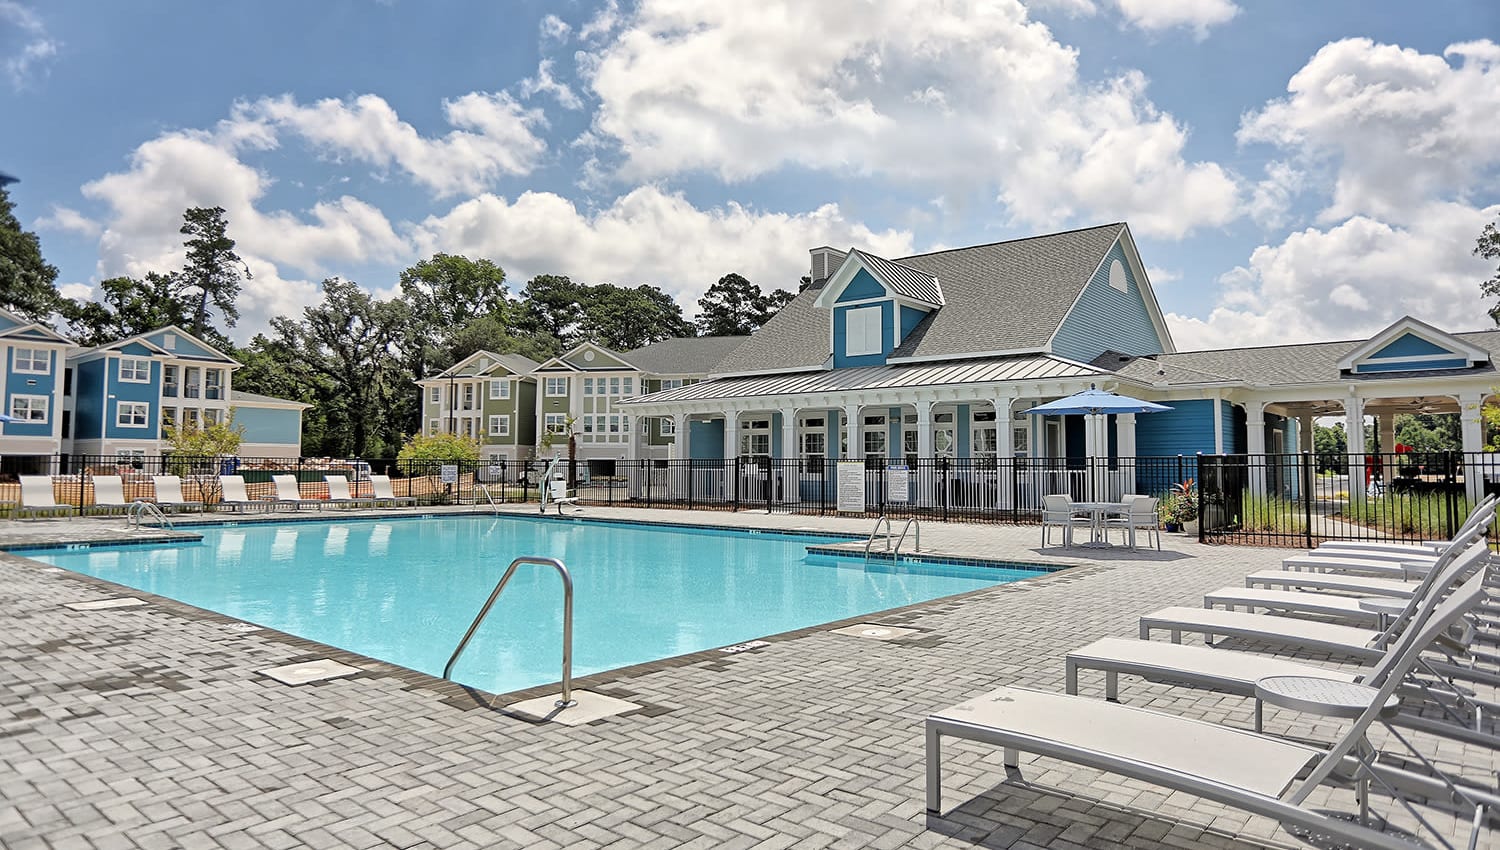 Resort-style swimming pool on a beautiful day at The Slate in Savannah, Georgia